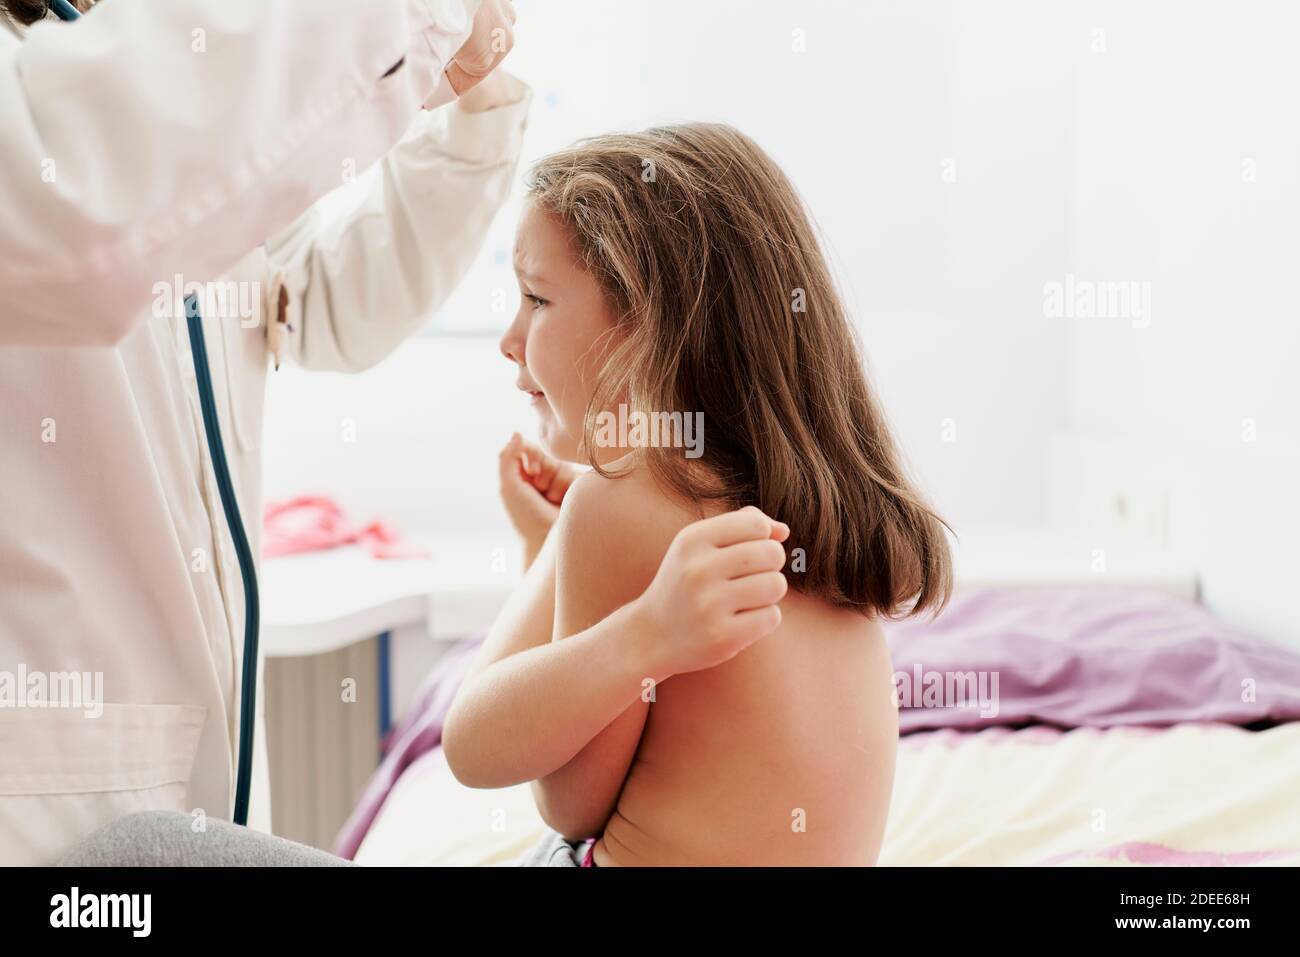 Girl with a sad, tearful face while being examined by a doctor. Concept of a family doctor Stock Photo